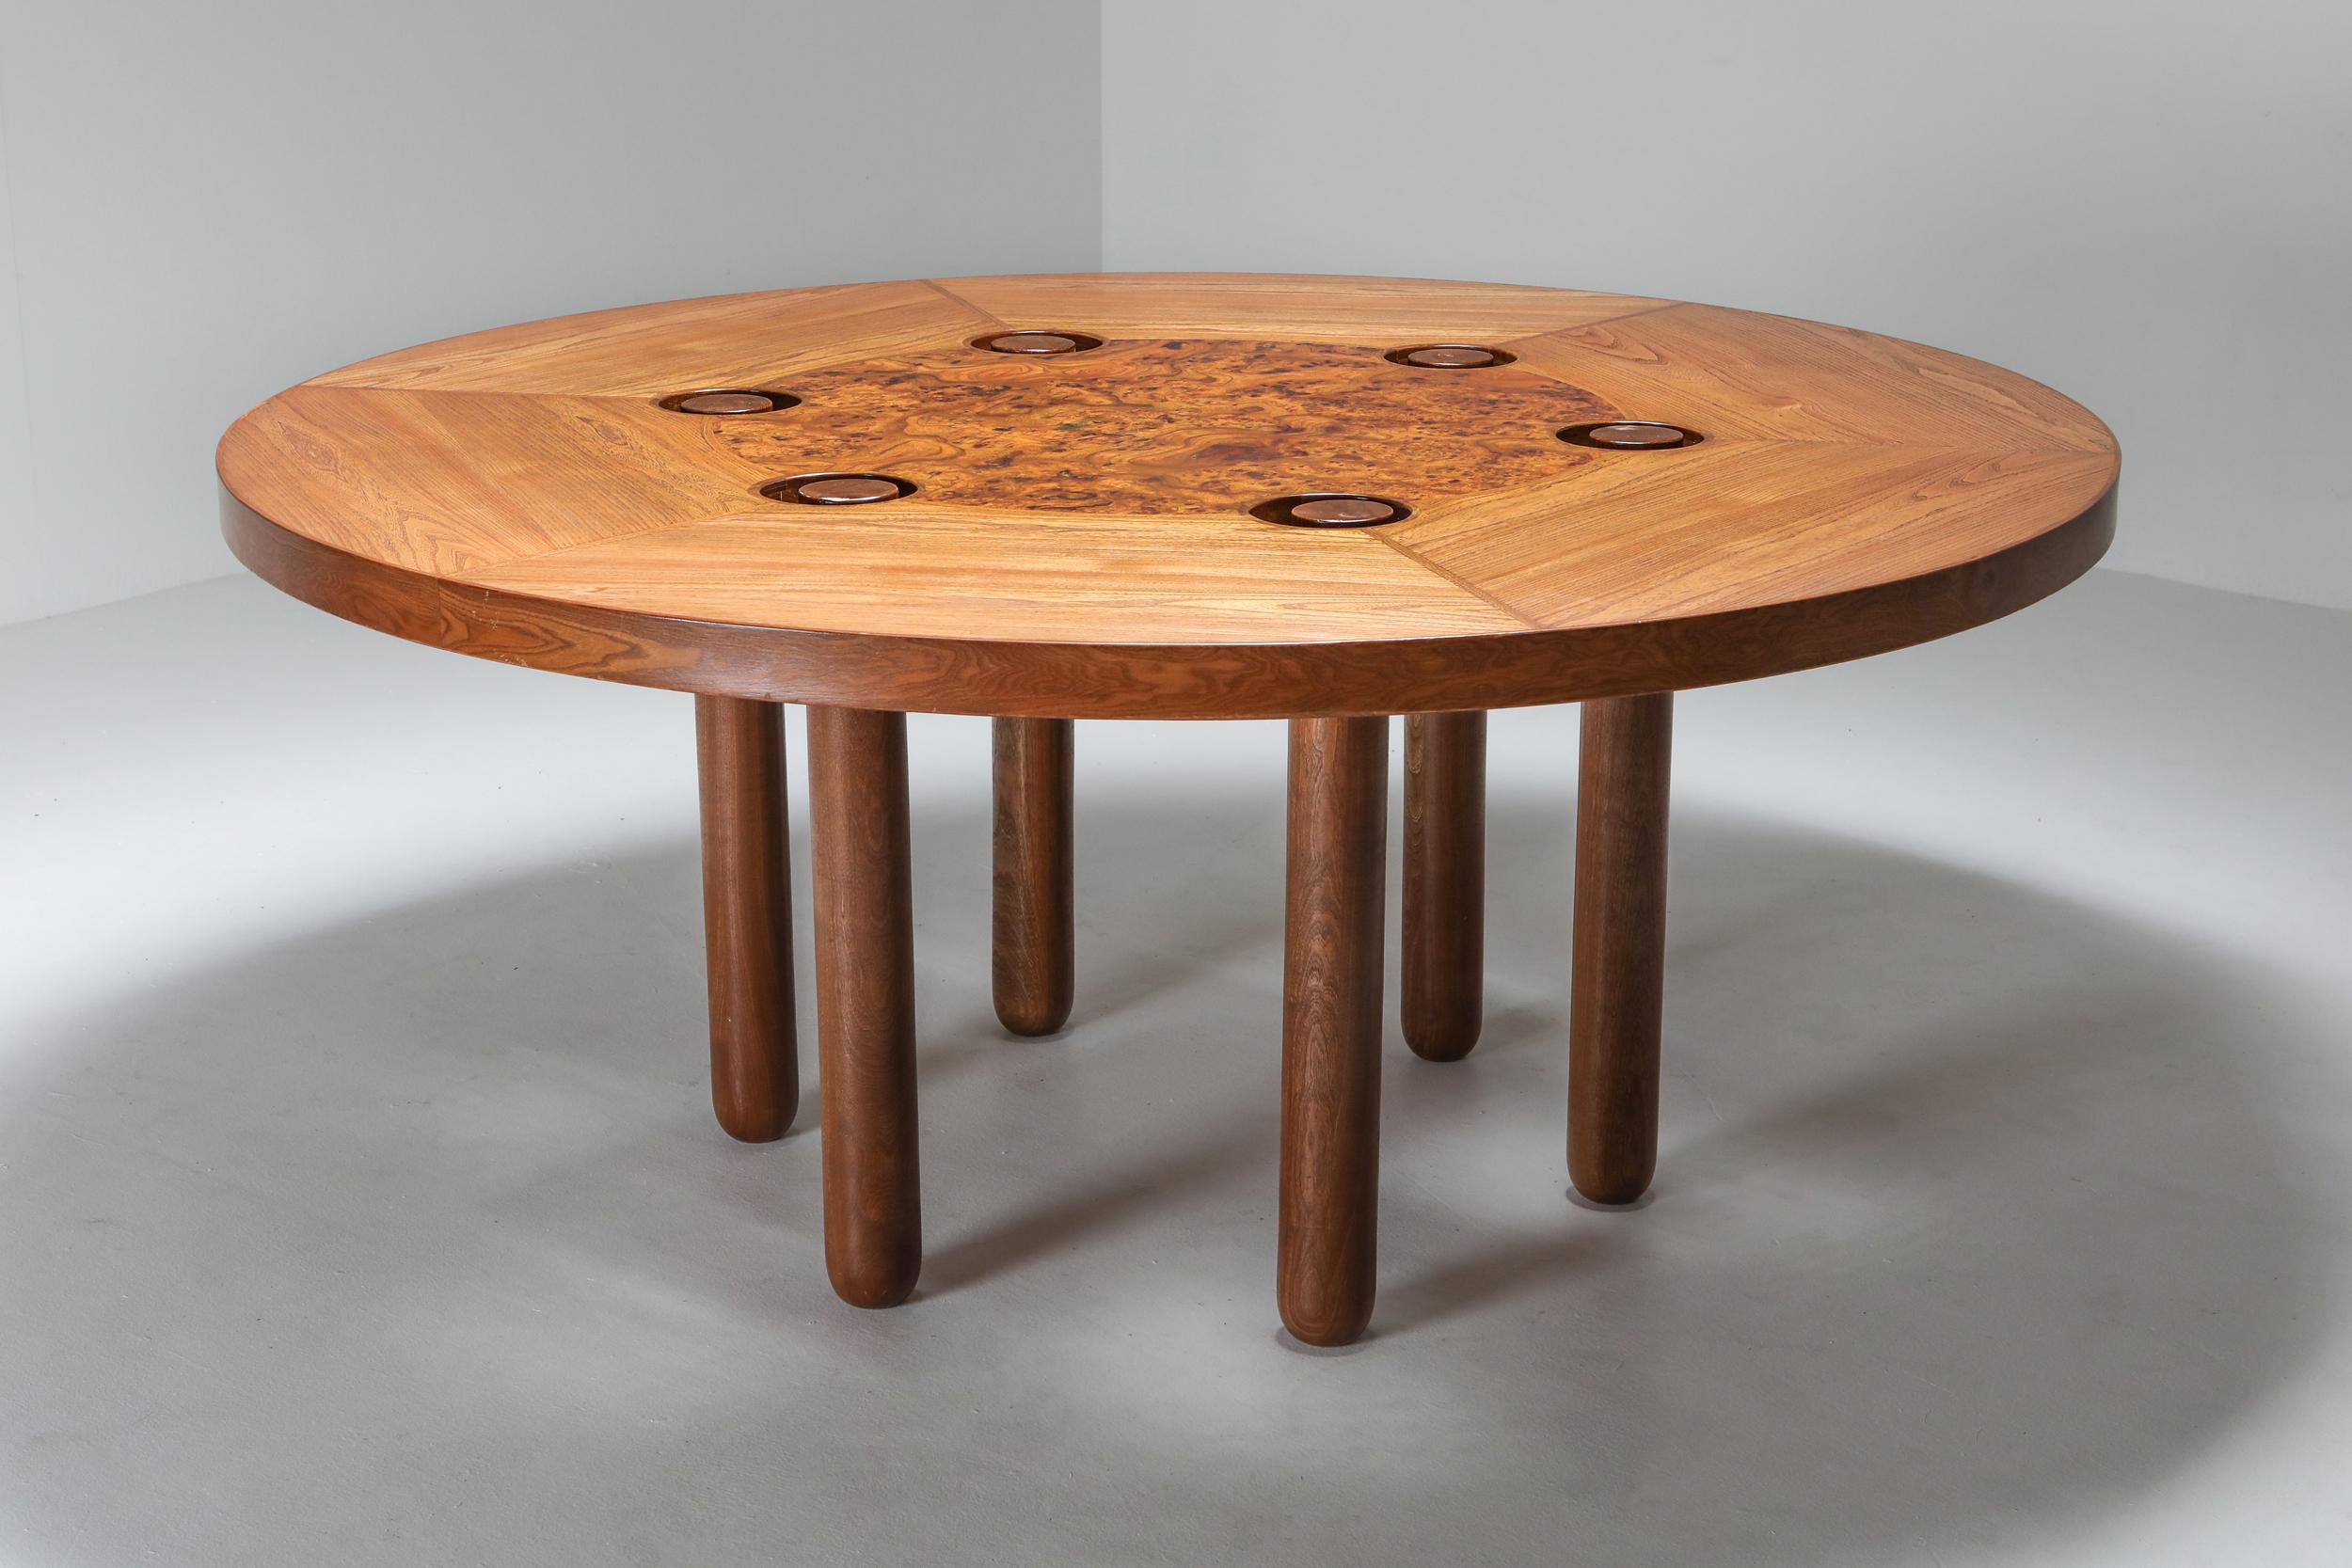 Italian design round dining table by Marzio Cecchi, oak, burl

Marzio Cecchi was interior designer, architect, furniture designer. Artist.
He made everything custom for his projects in high-end materials.
Truly one of Italy's greats.
His